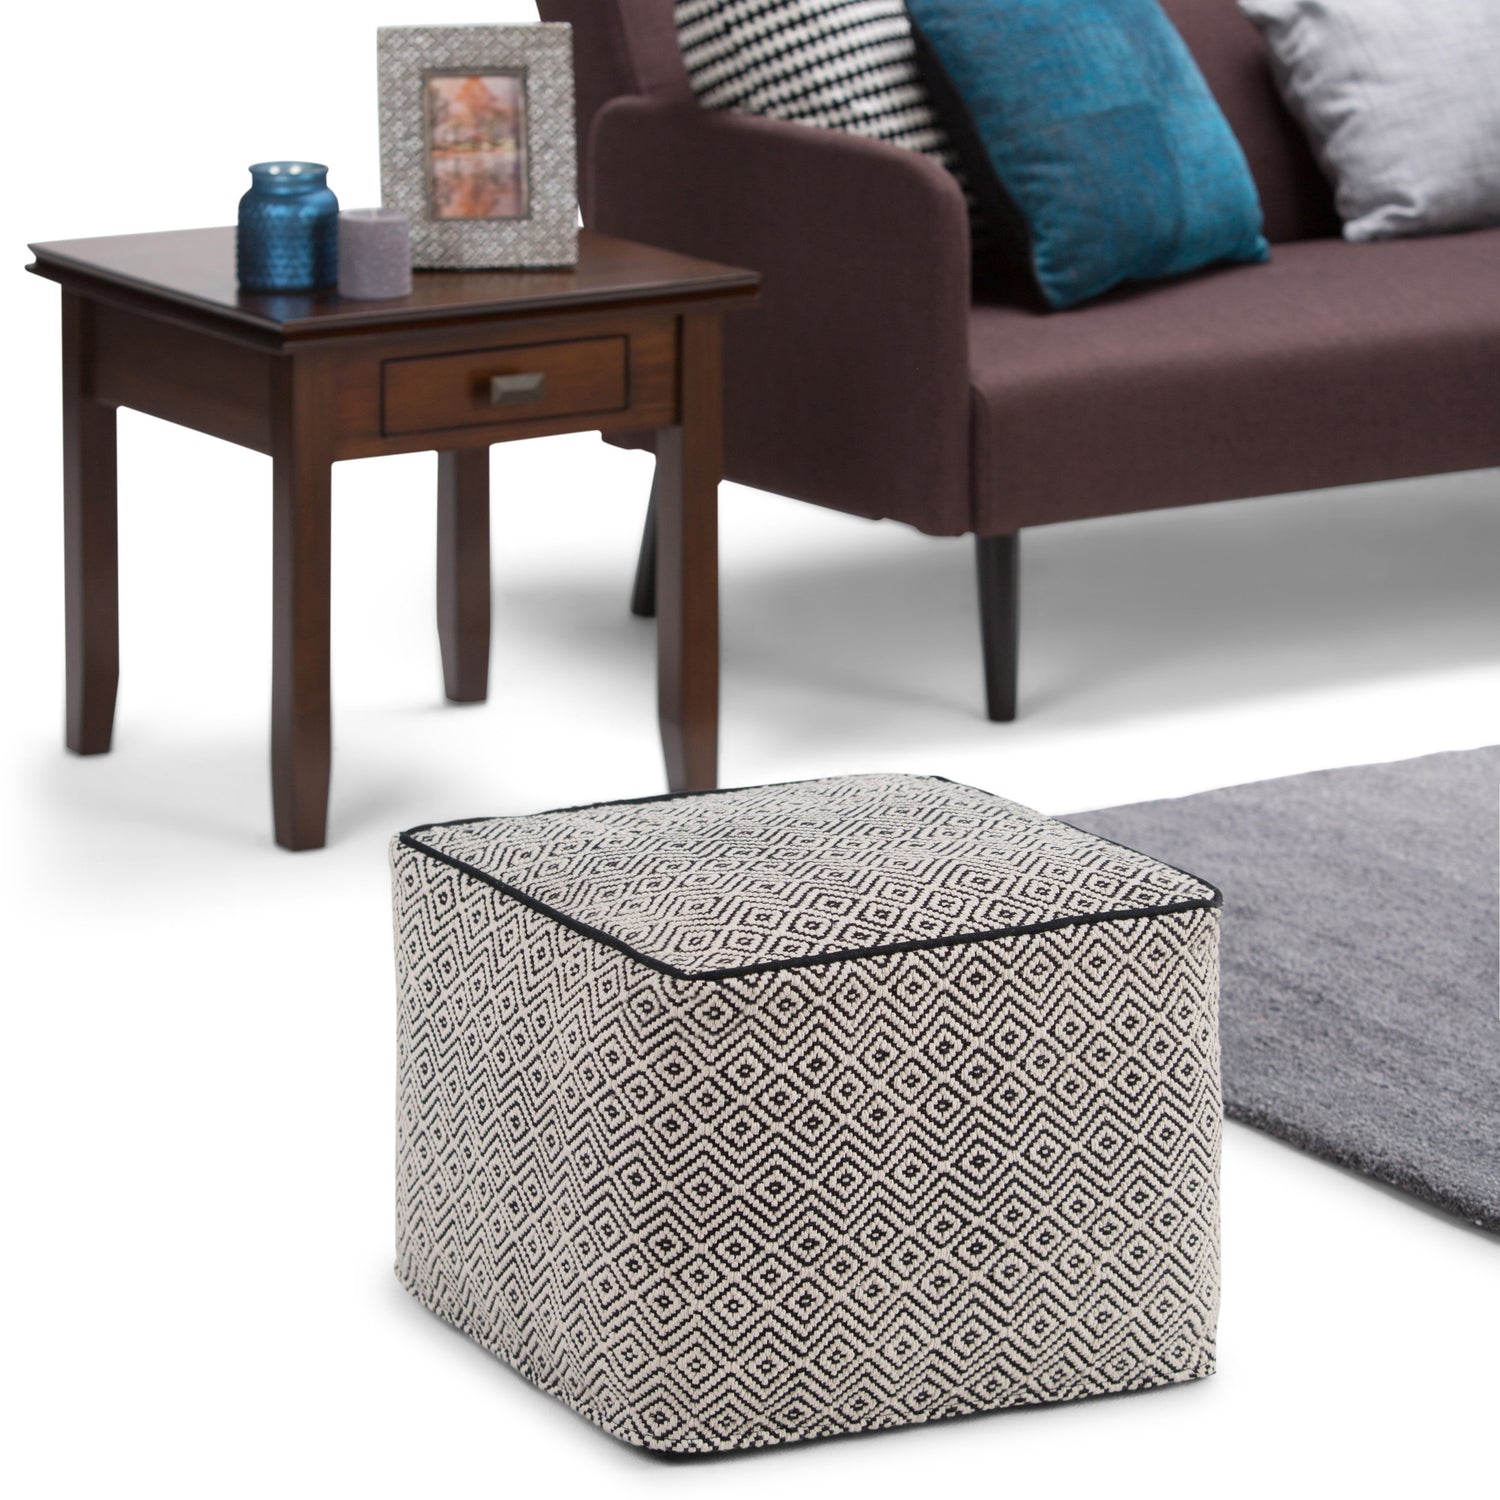 Patterned Black and Natural | Brynn Patterned Square Pouf